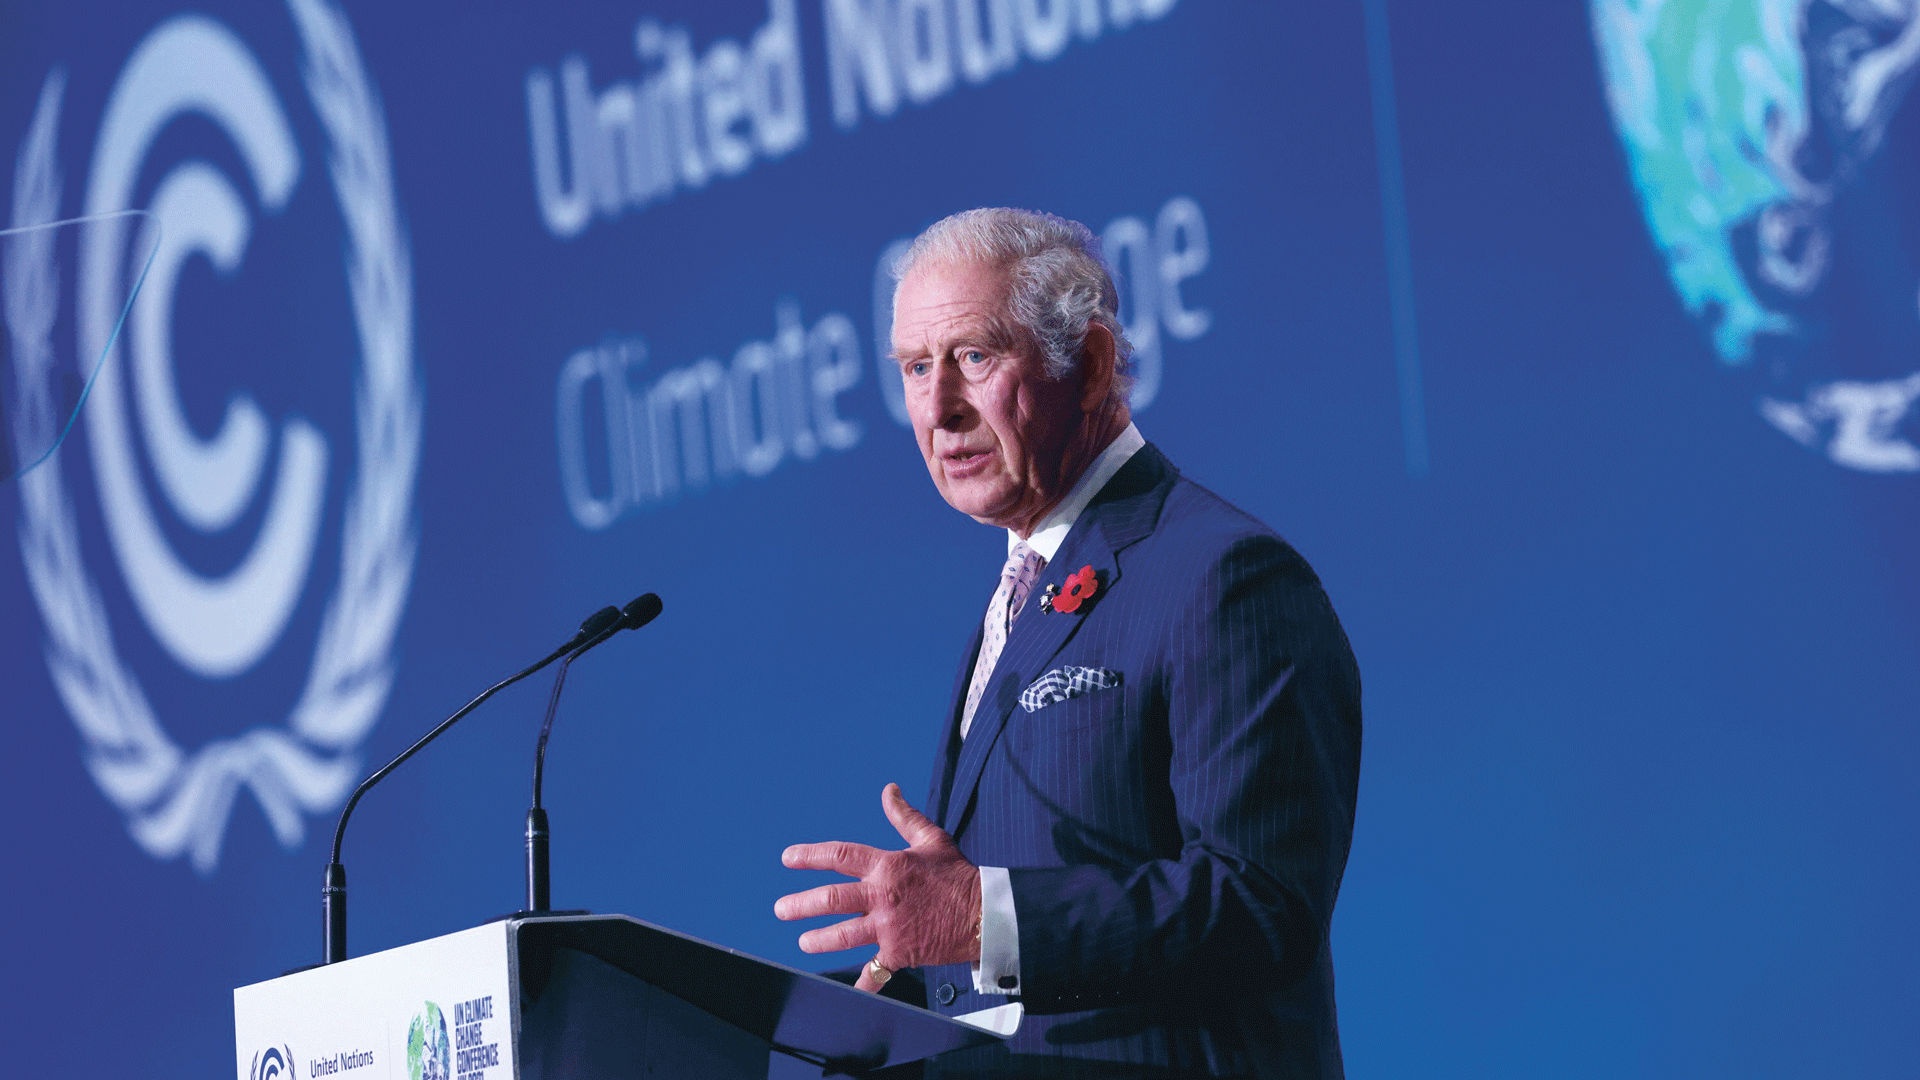 Prince Charles gives speech at COP26